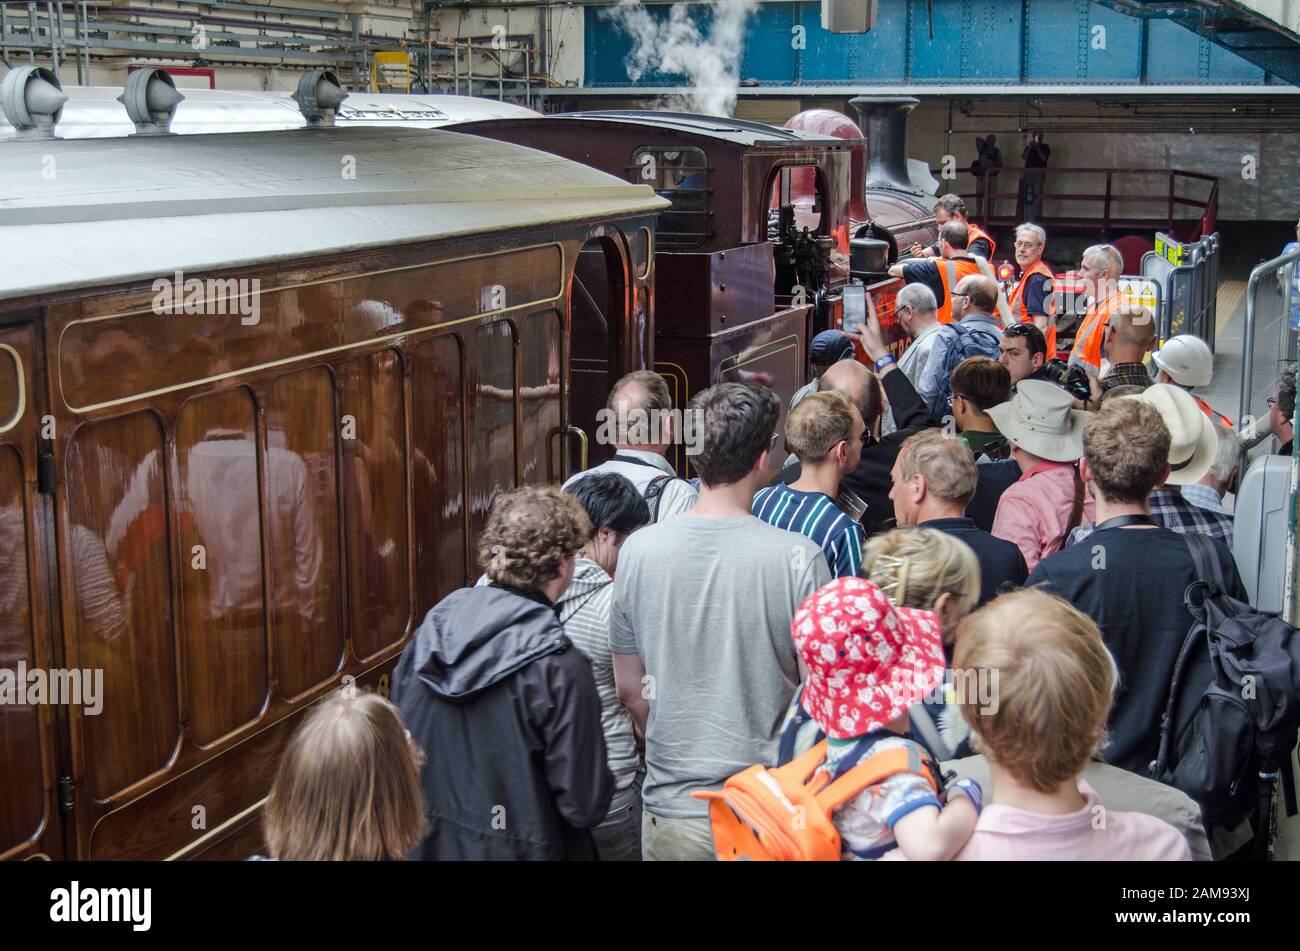 London, UK - June 22, 2019: Crowds admiring the last steam train to use the District Line to arrive at Ealing Broadway Station.  The special event mar Stock Photo